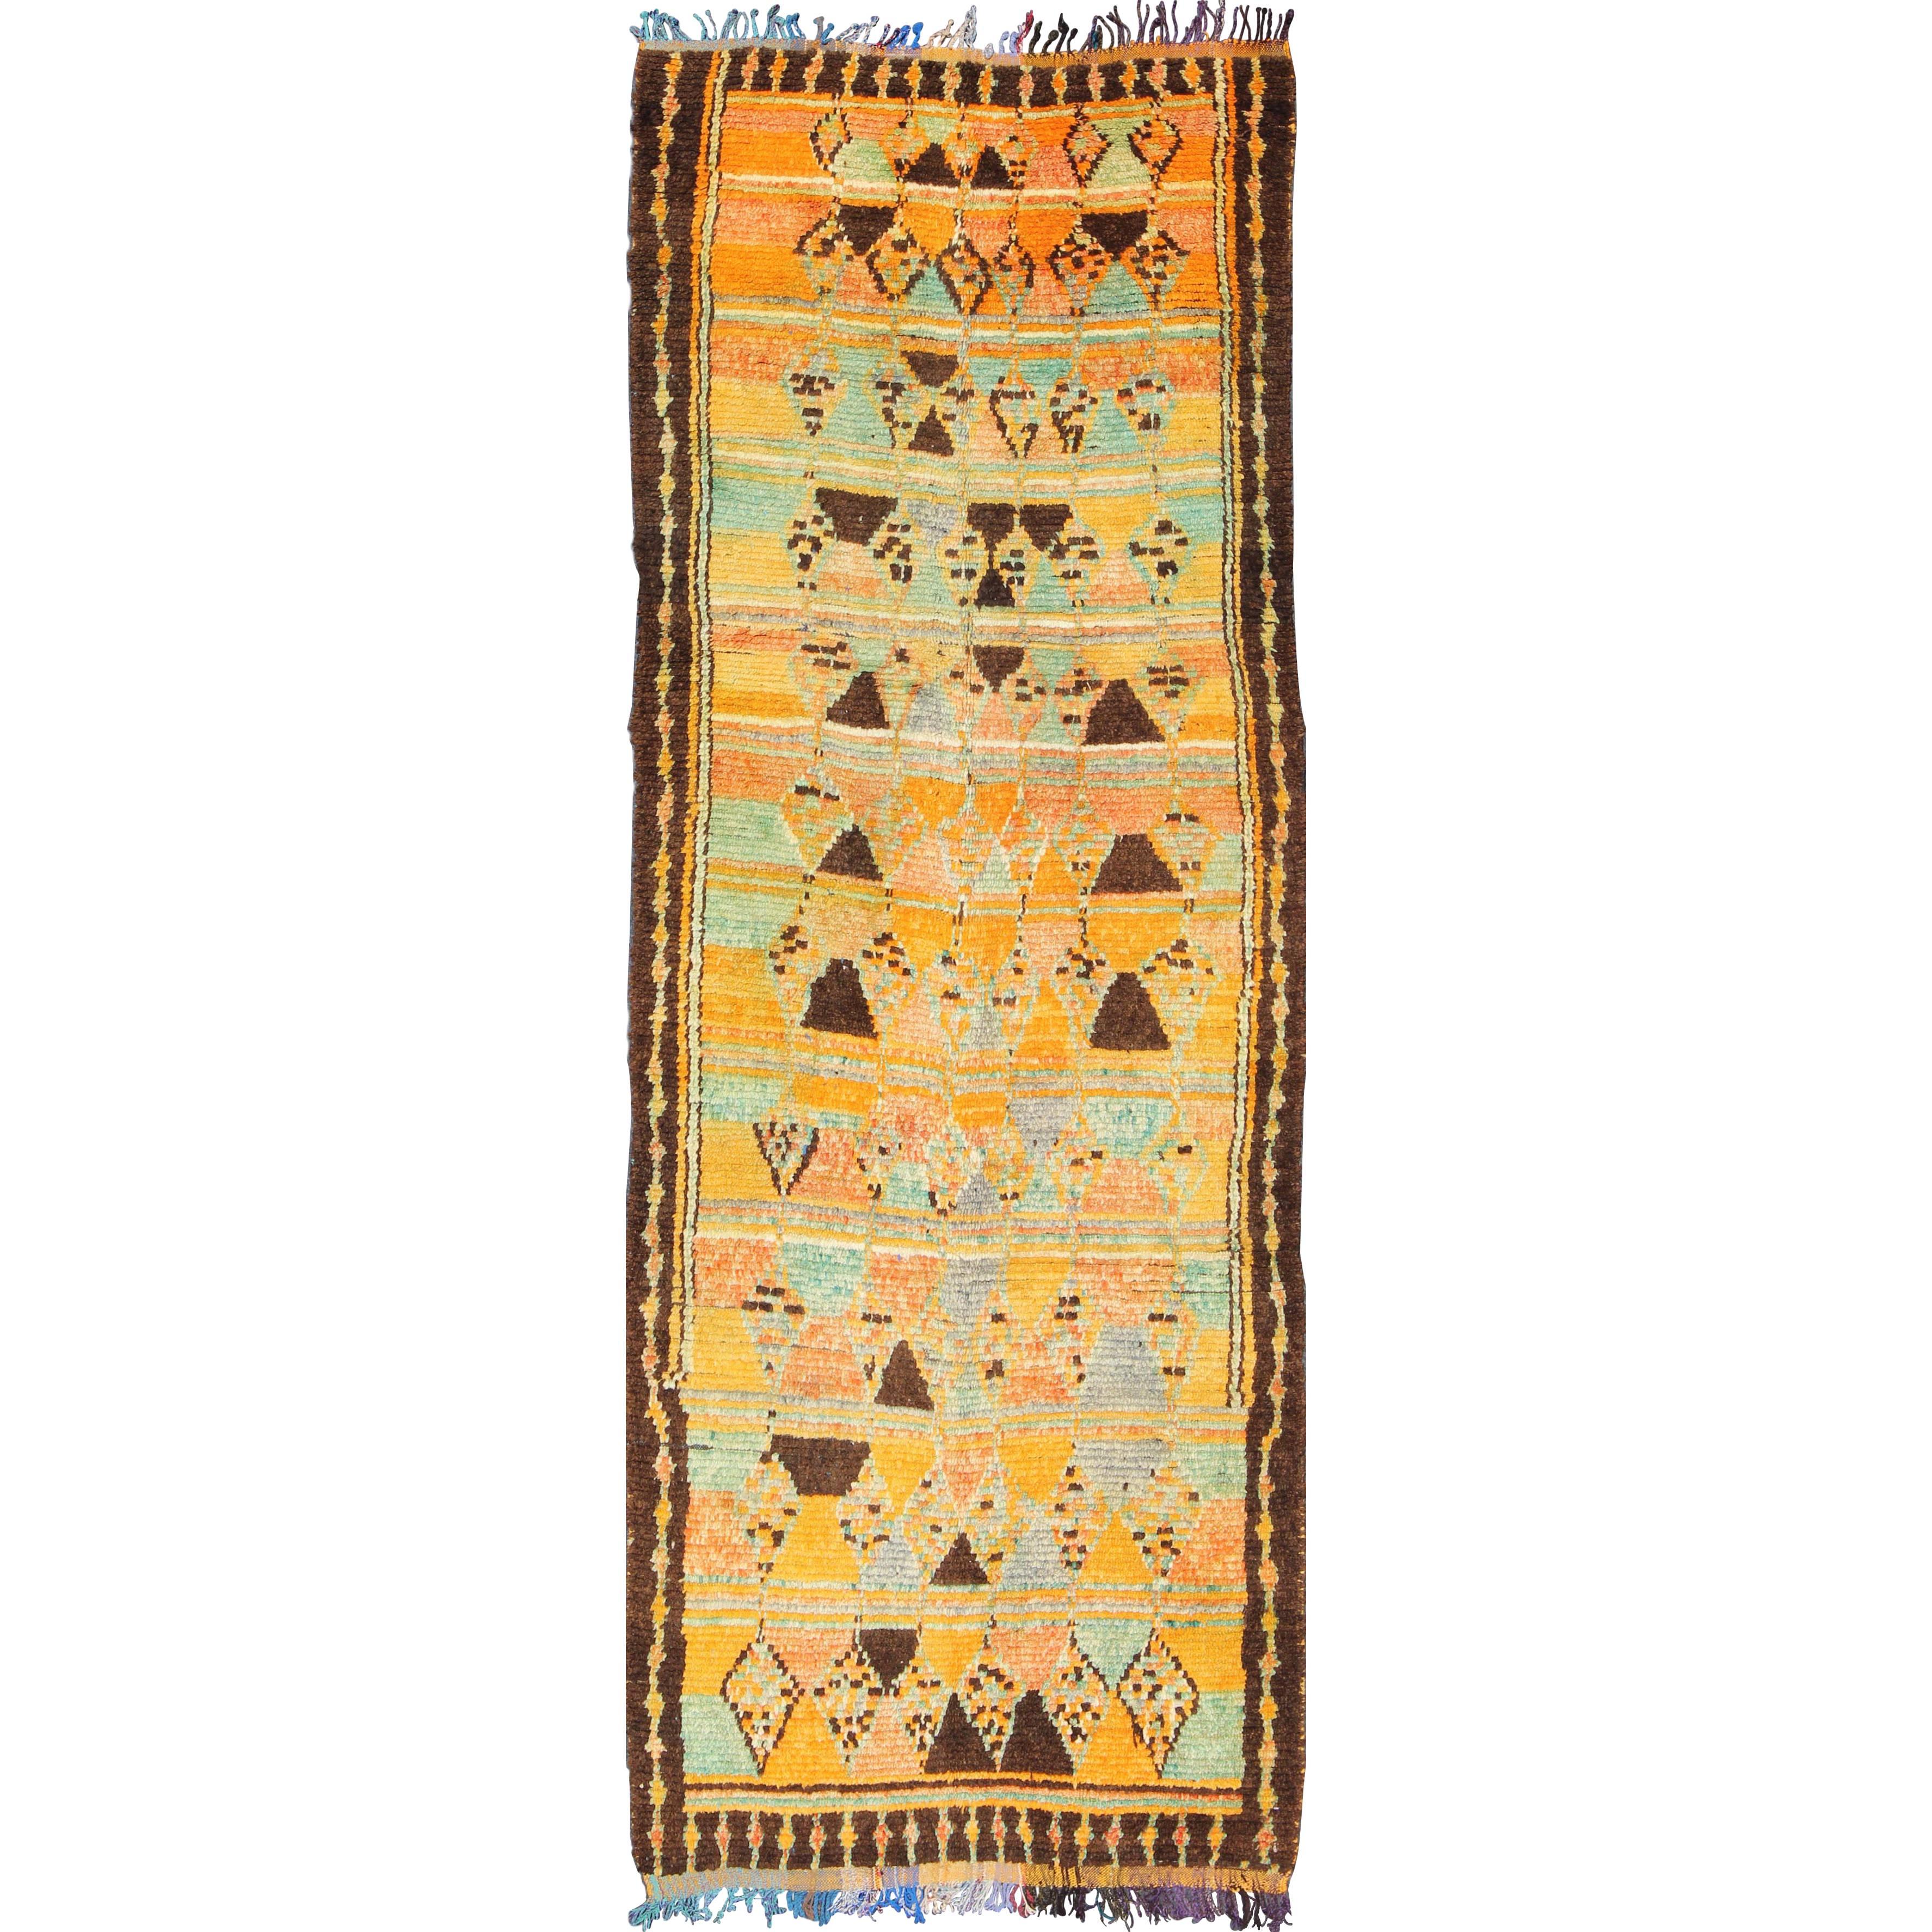 Long Vintage Moroccan Runner with Tribal Design in Orange, Brown, Blue and Green For Sale